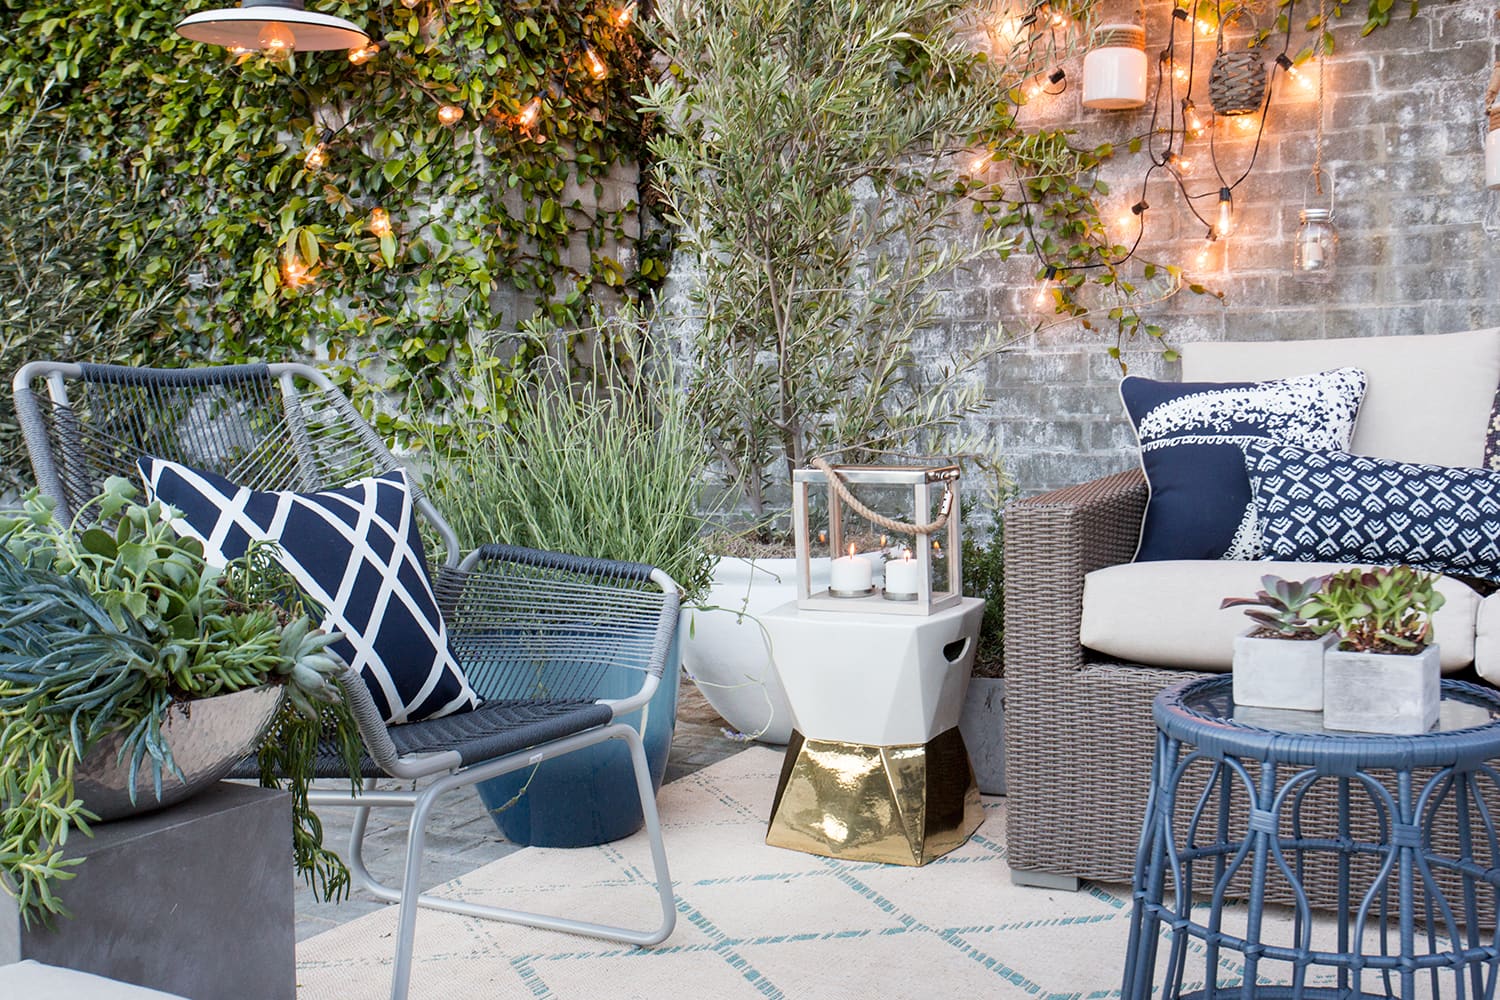 West Elm Outdoor Furniture Sale 2023: Here Are 10 of The Best Items Available